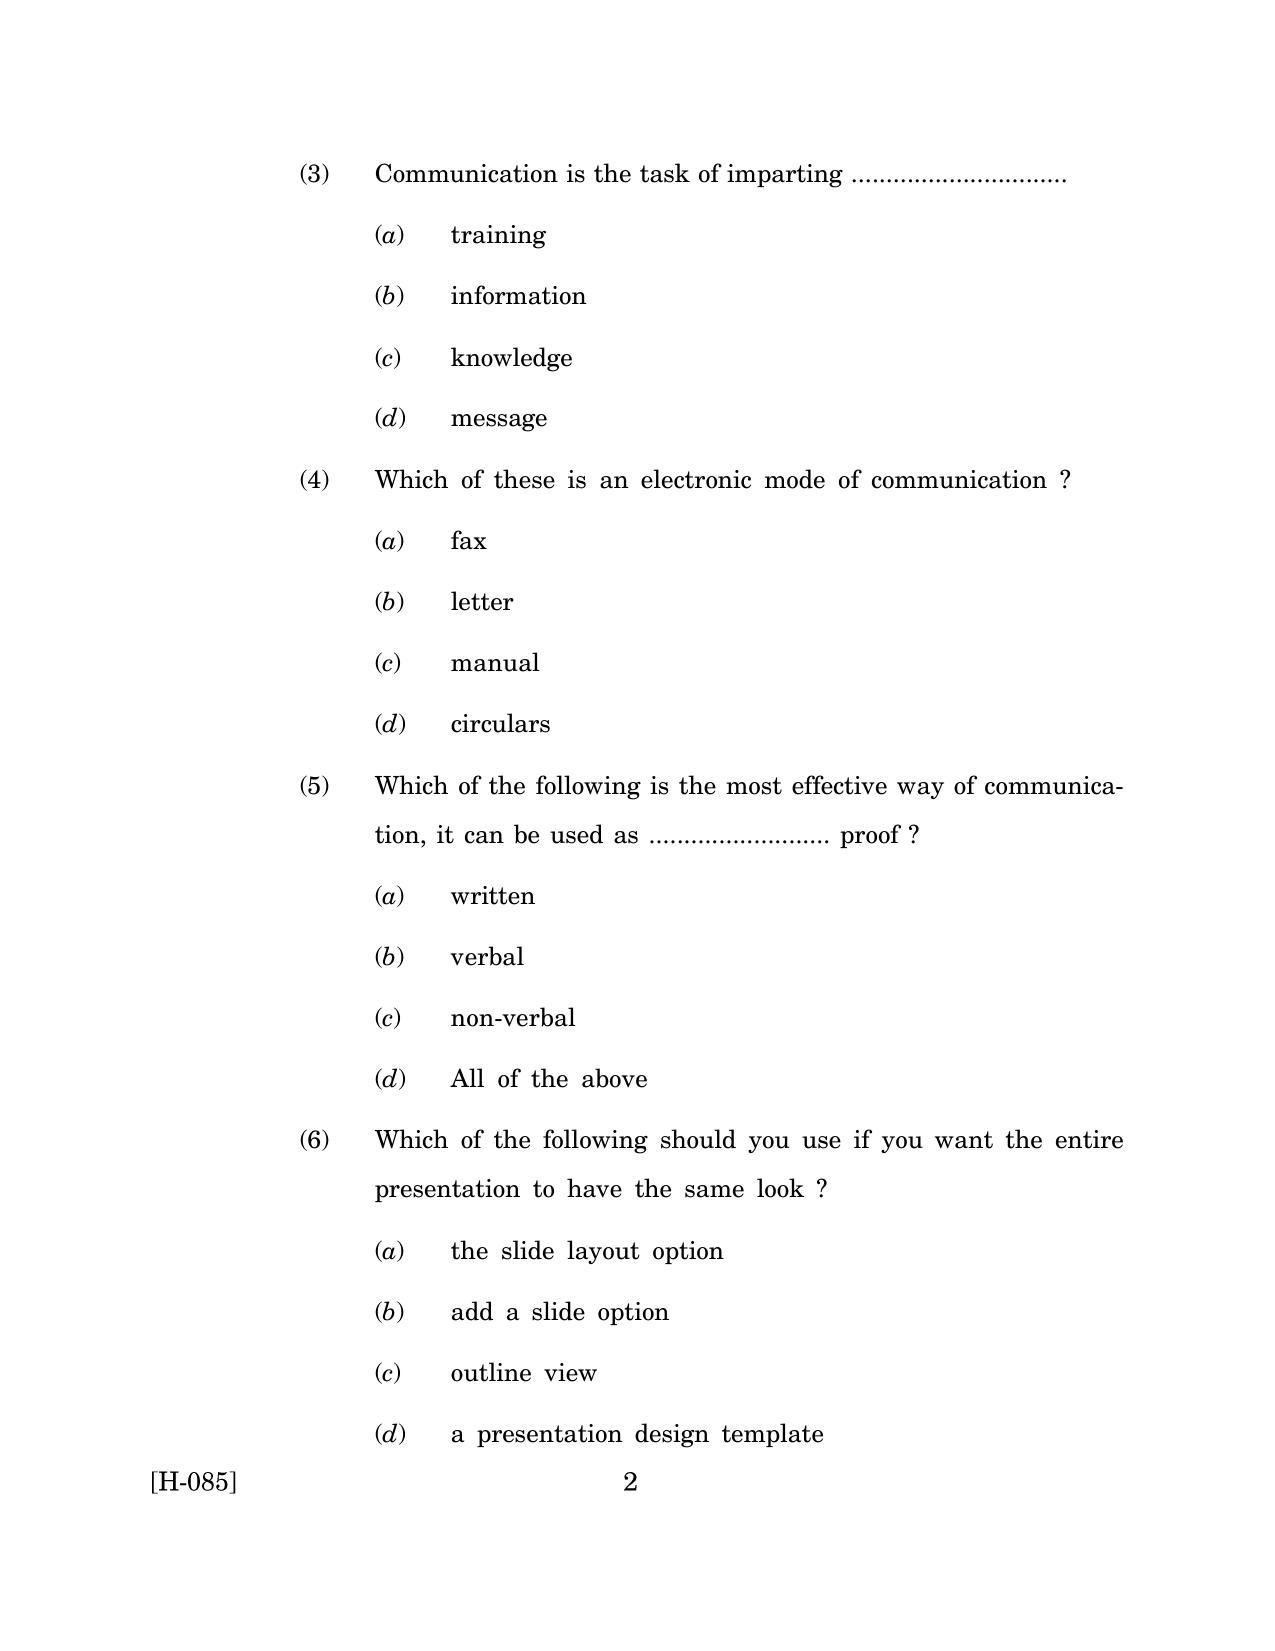 Goa Board Class 12 Telecommunication   (March 2019_0) Question Paper - Page 2